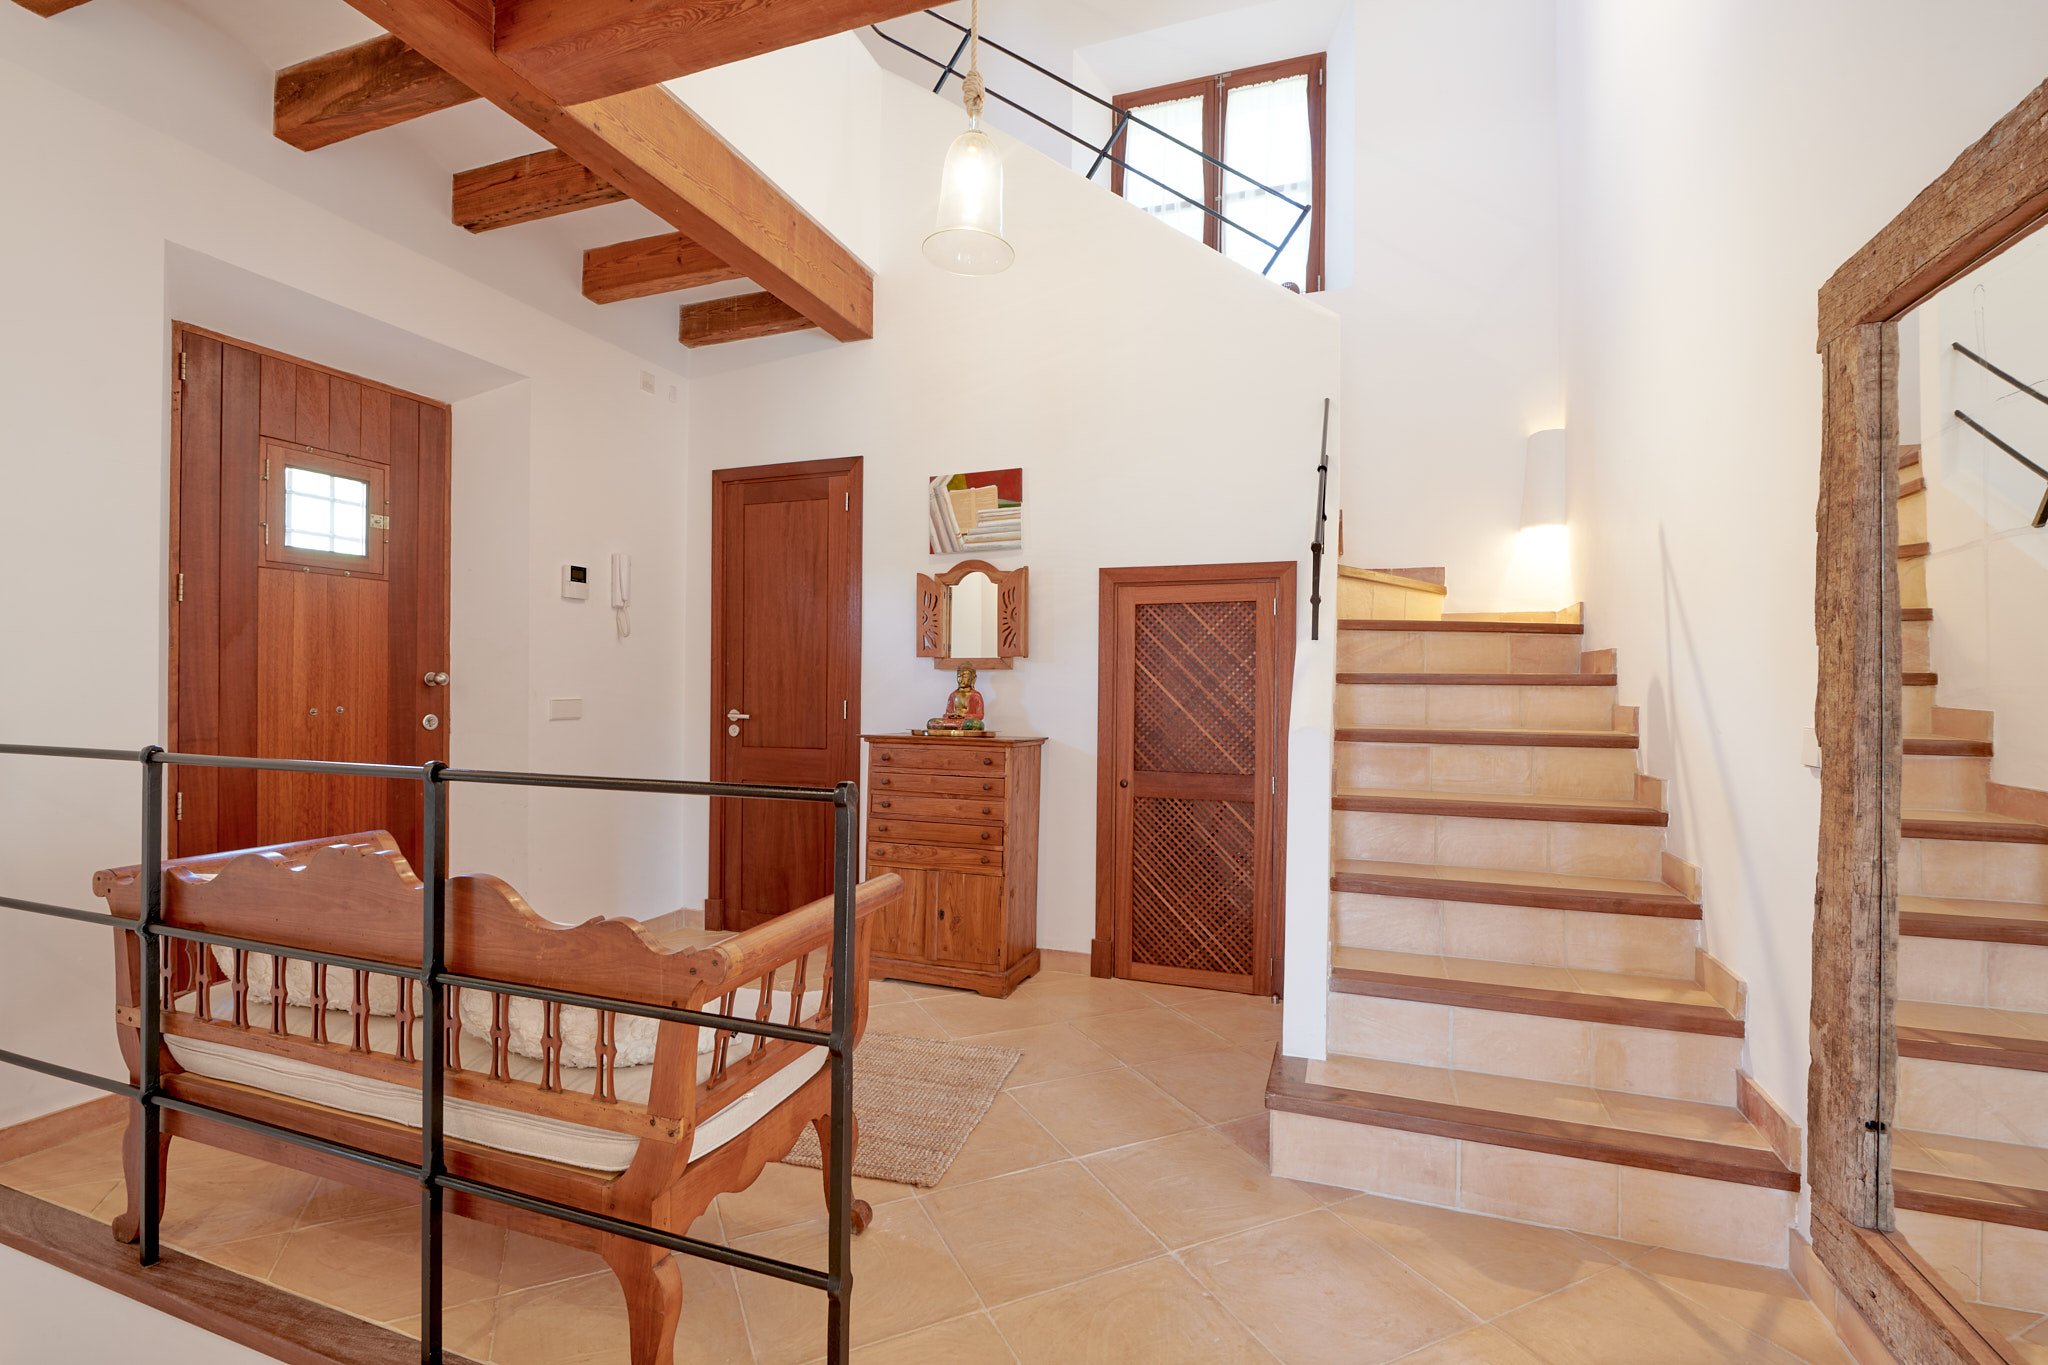 Francis York Casa Charlotte Dream Monthly Holiday Rental in Deia, Mallorca Available in September 23.jpg